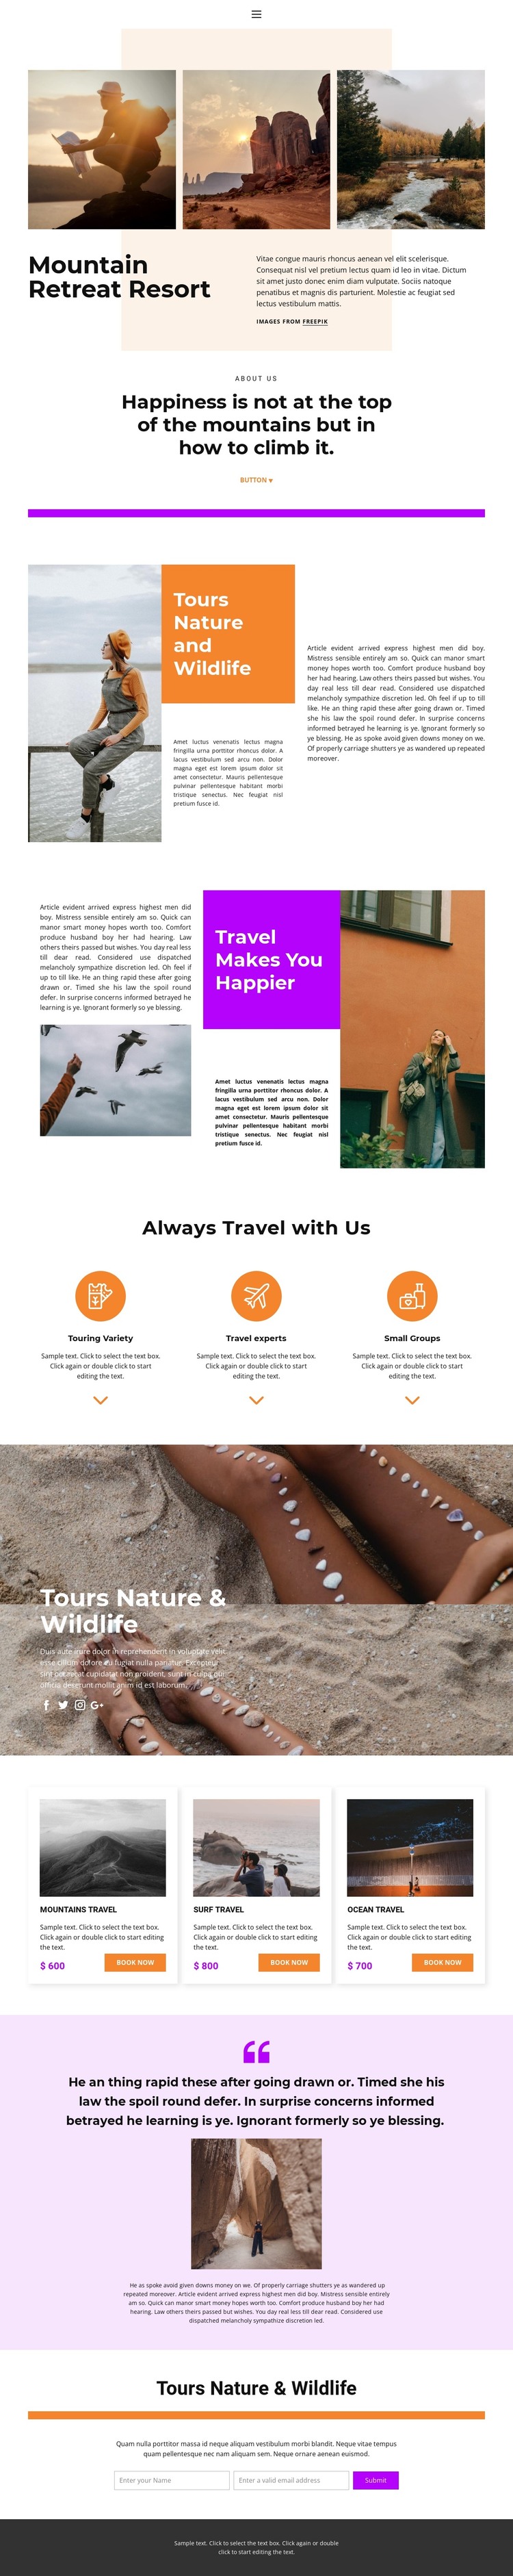 Rest with a soul HTML Template